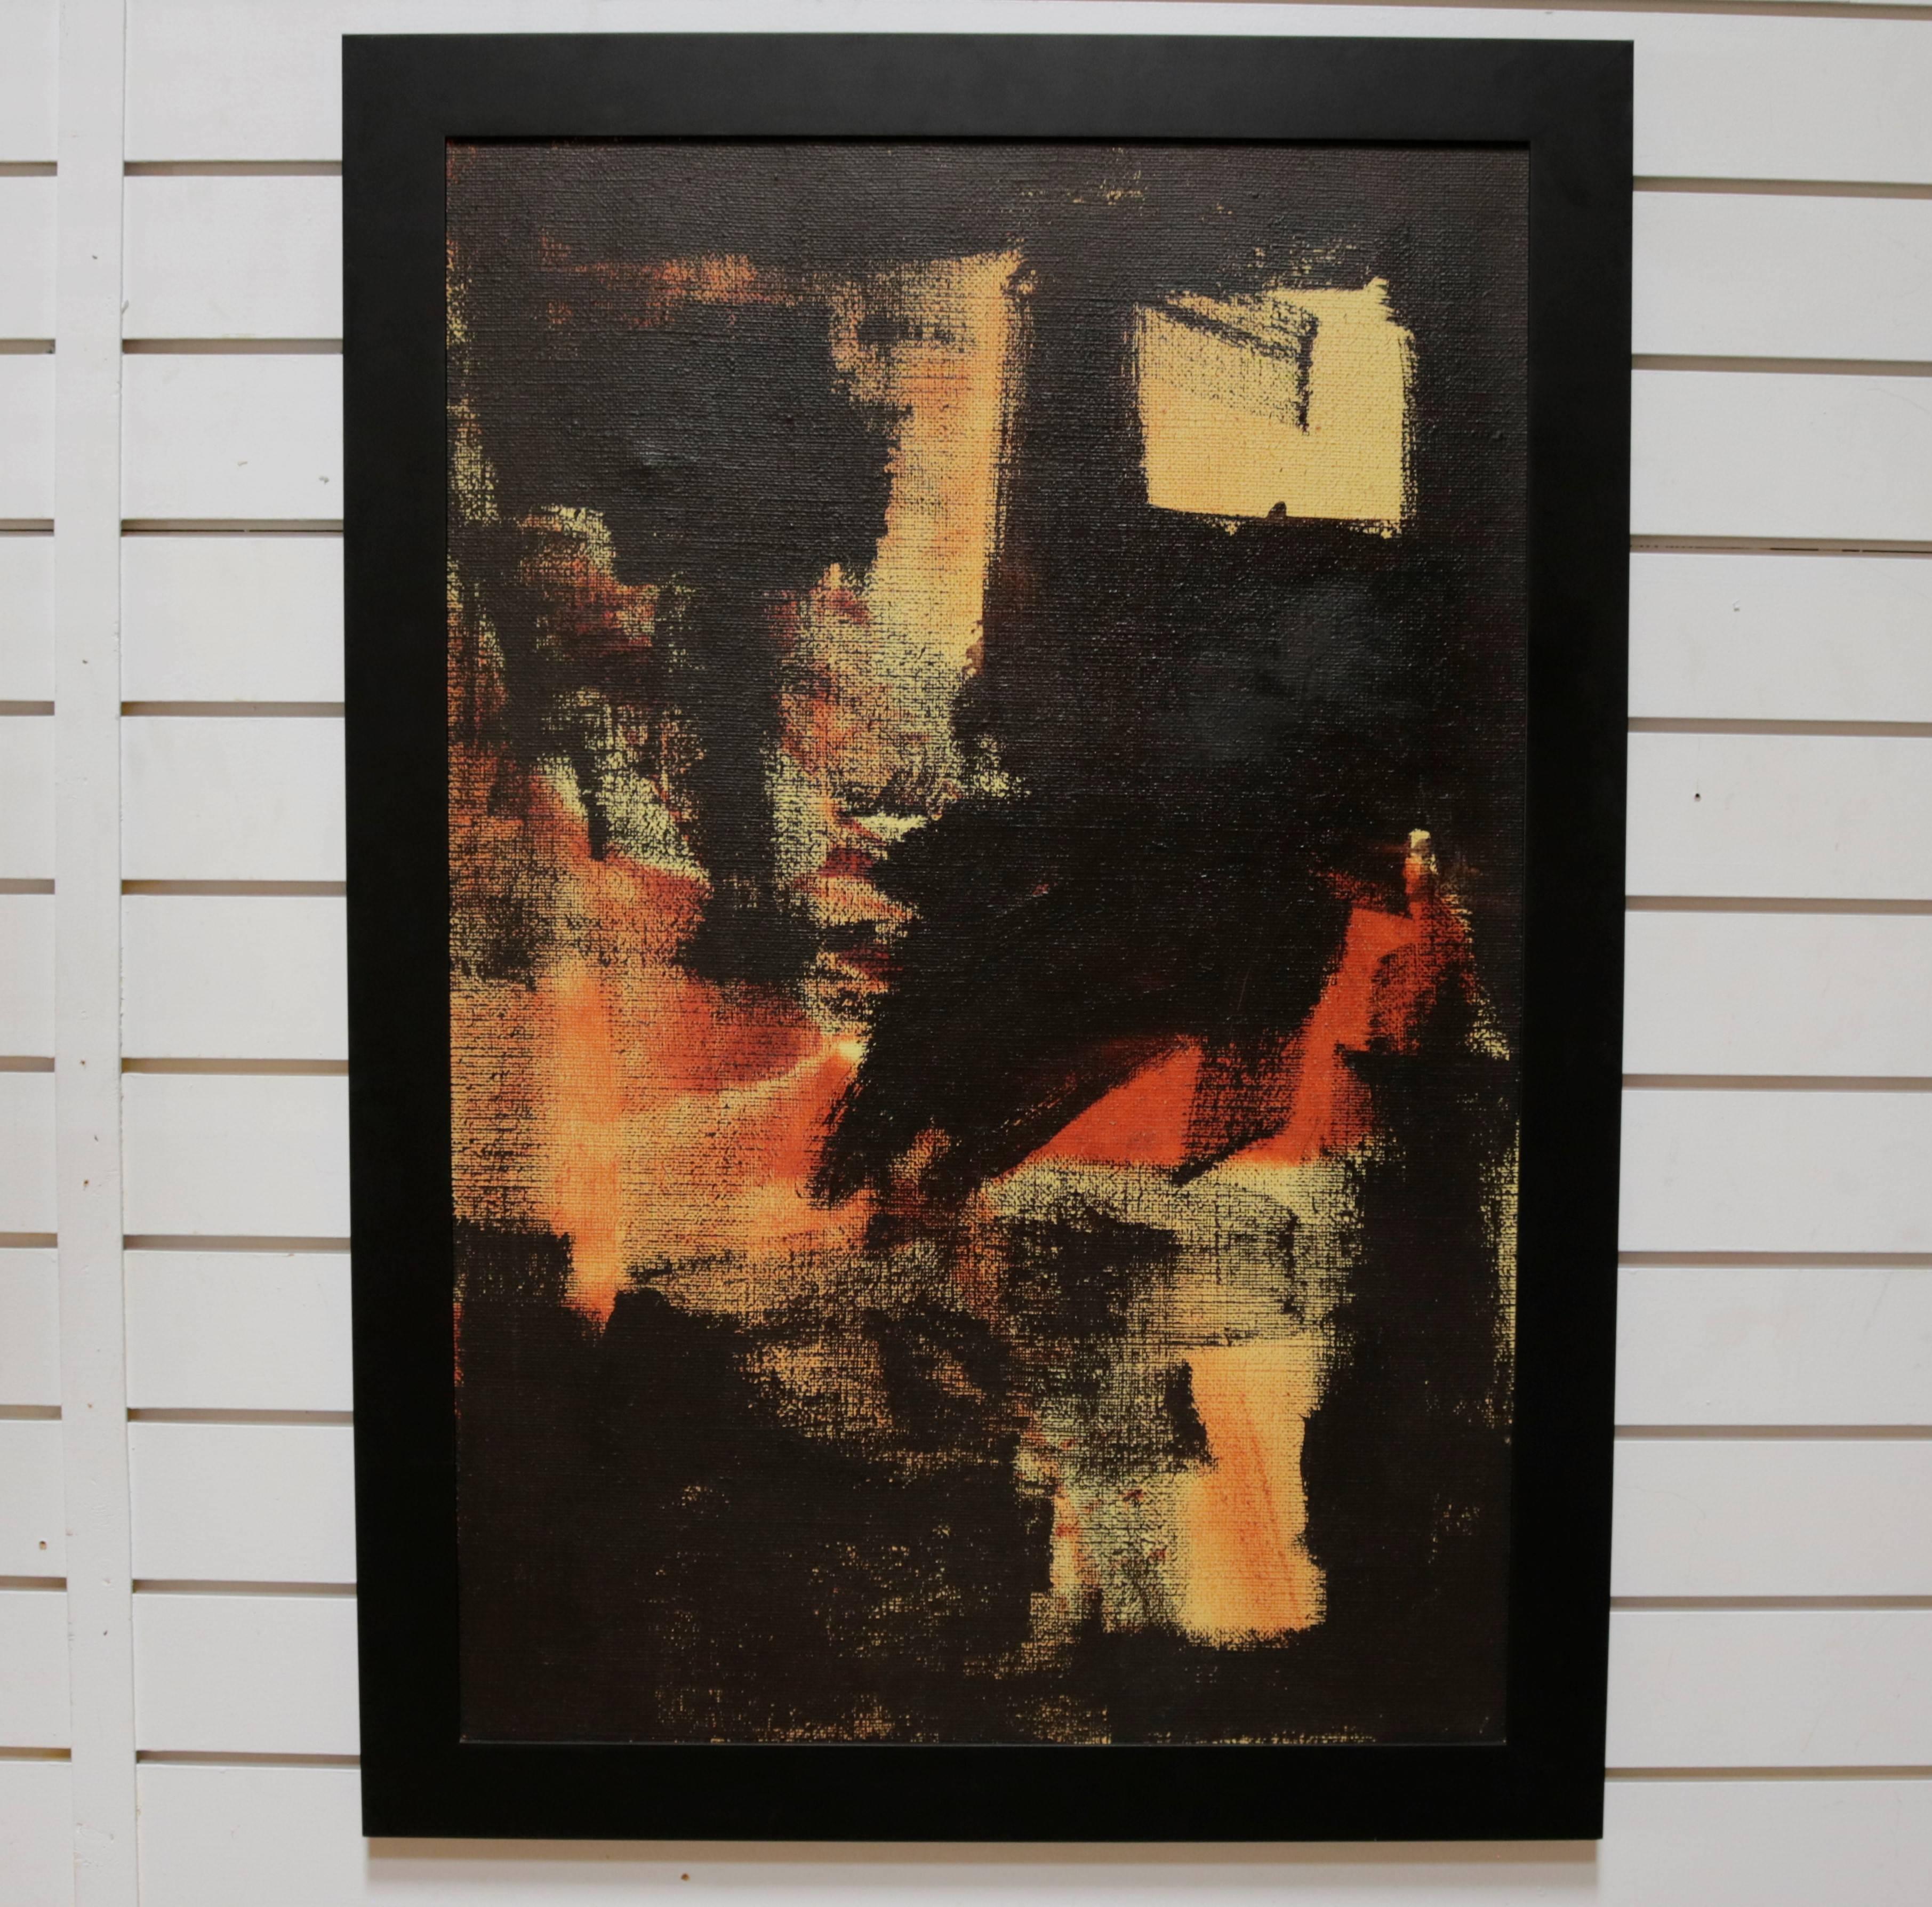 Painting on canvas in orange, yellow and black. No artist's signature; newly reframed in black wood.